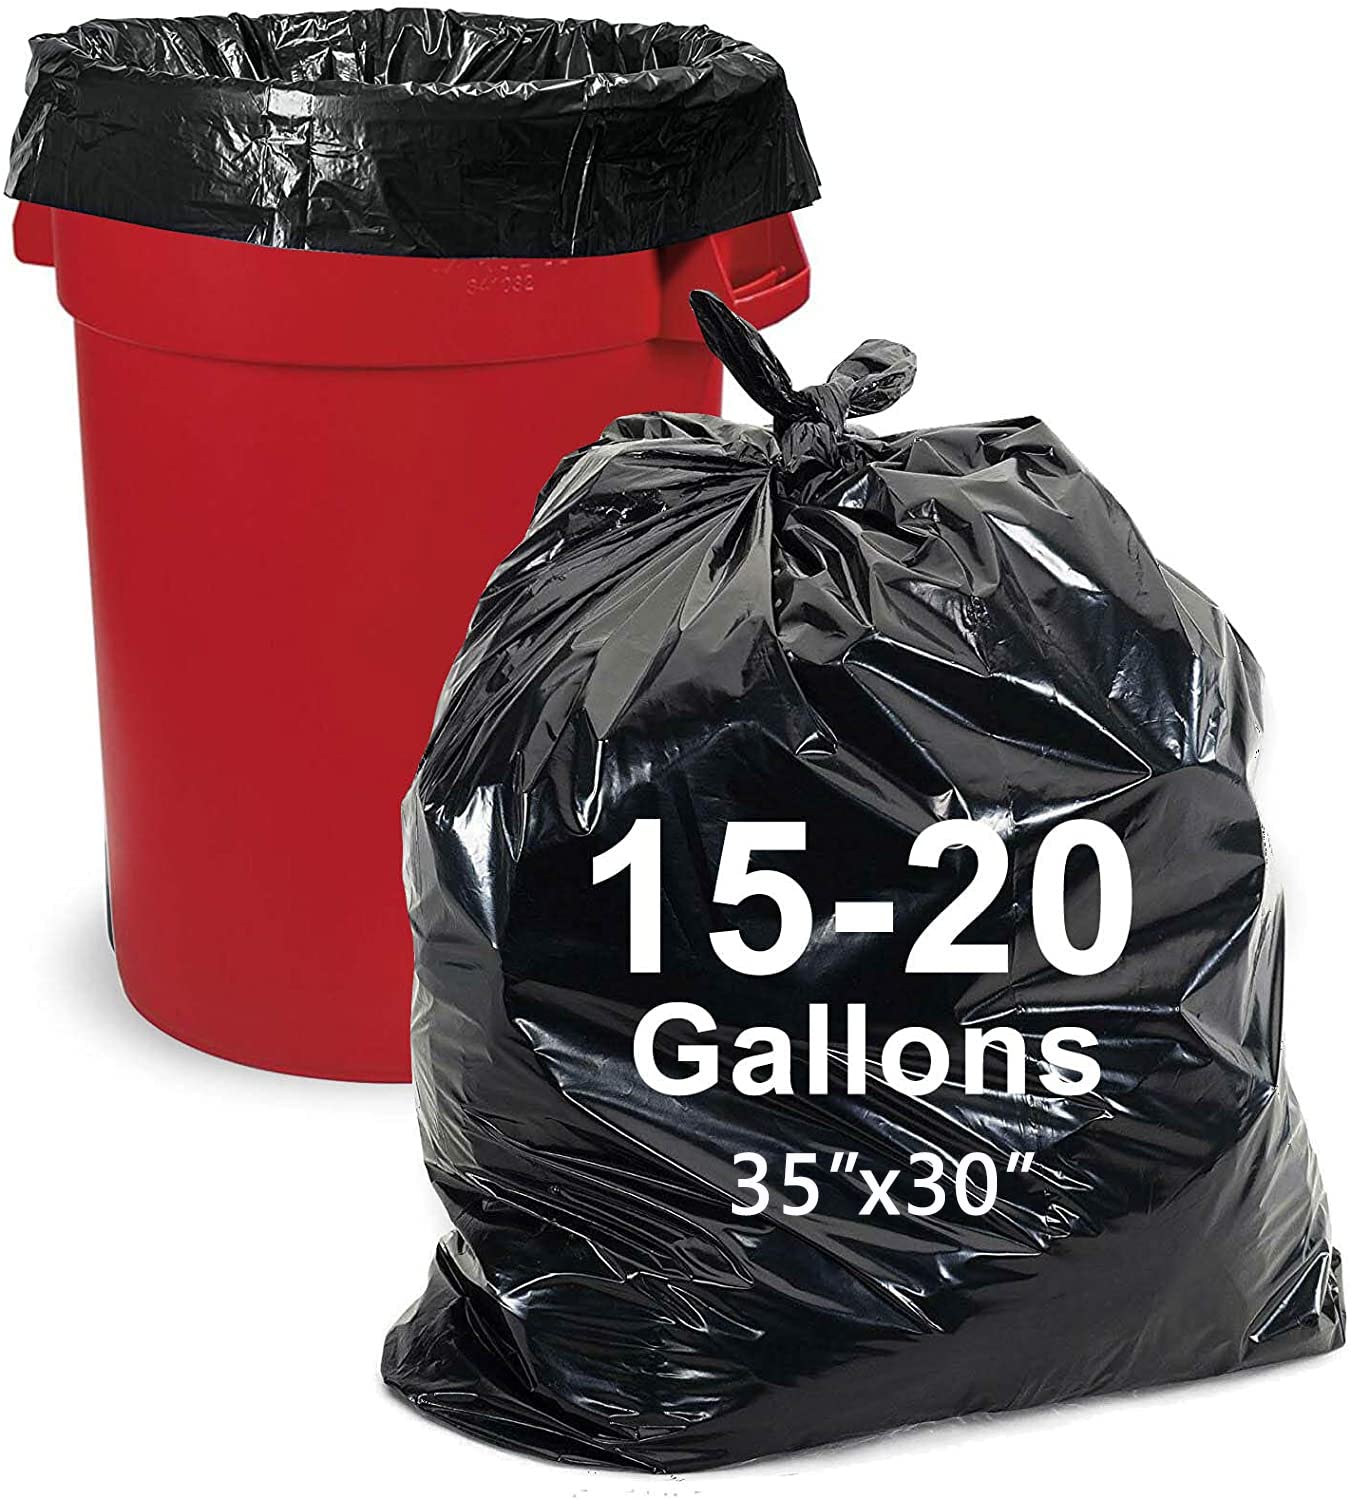 Garbage and Waste Bags - Bin Bag Latest Price, Manufacturers